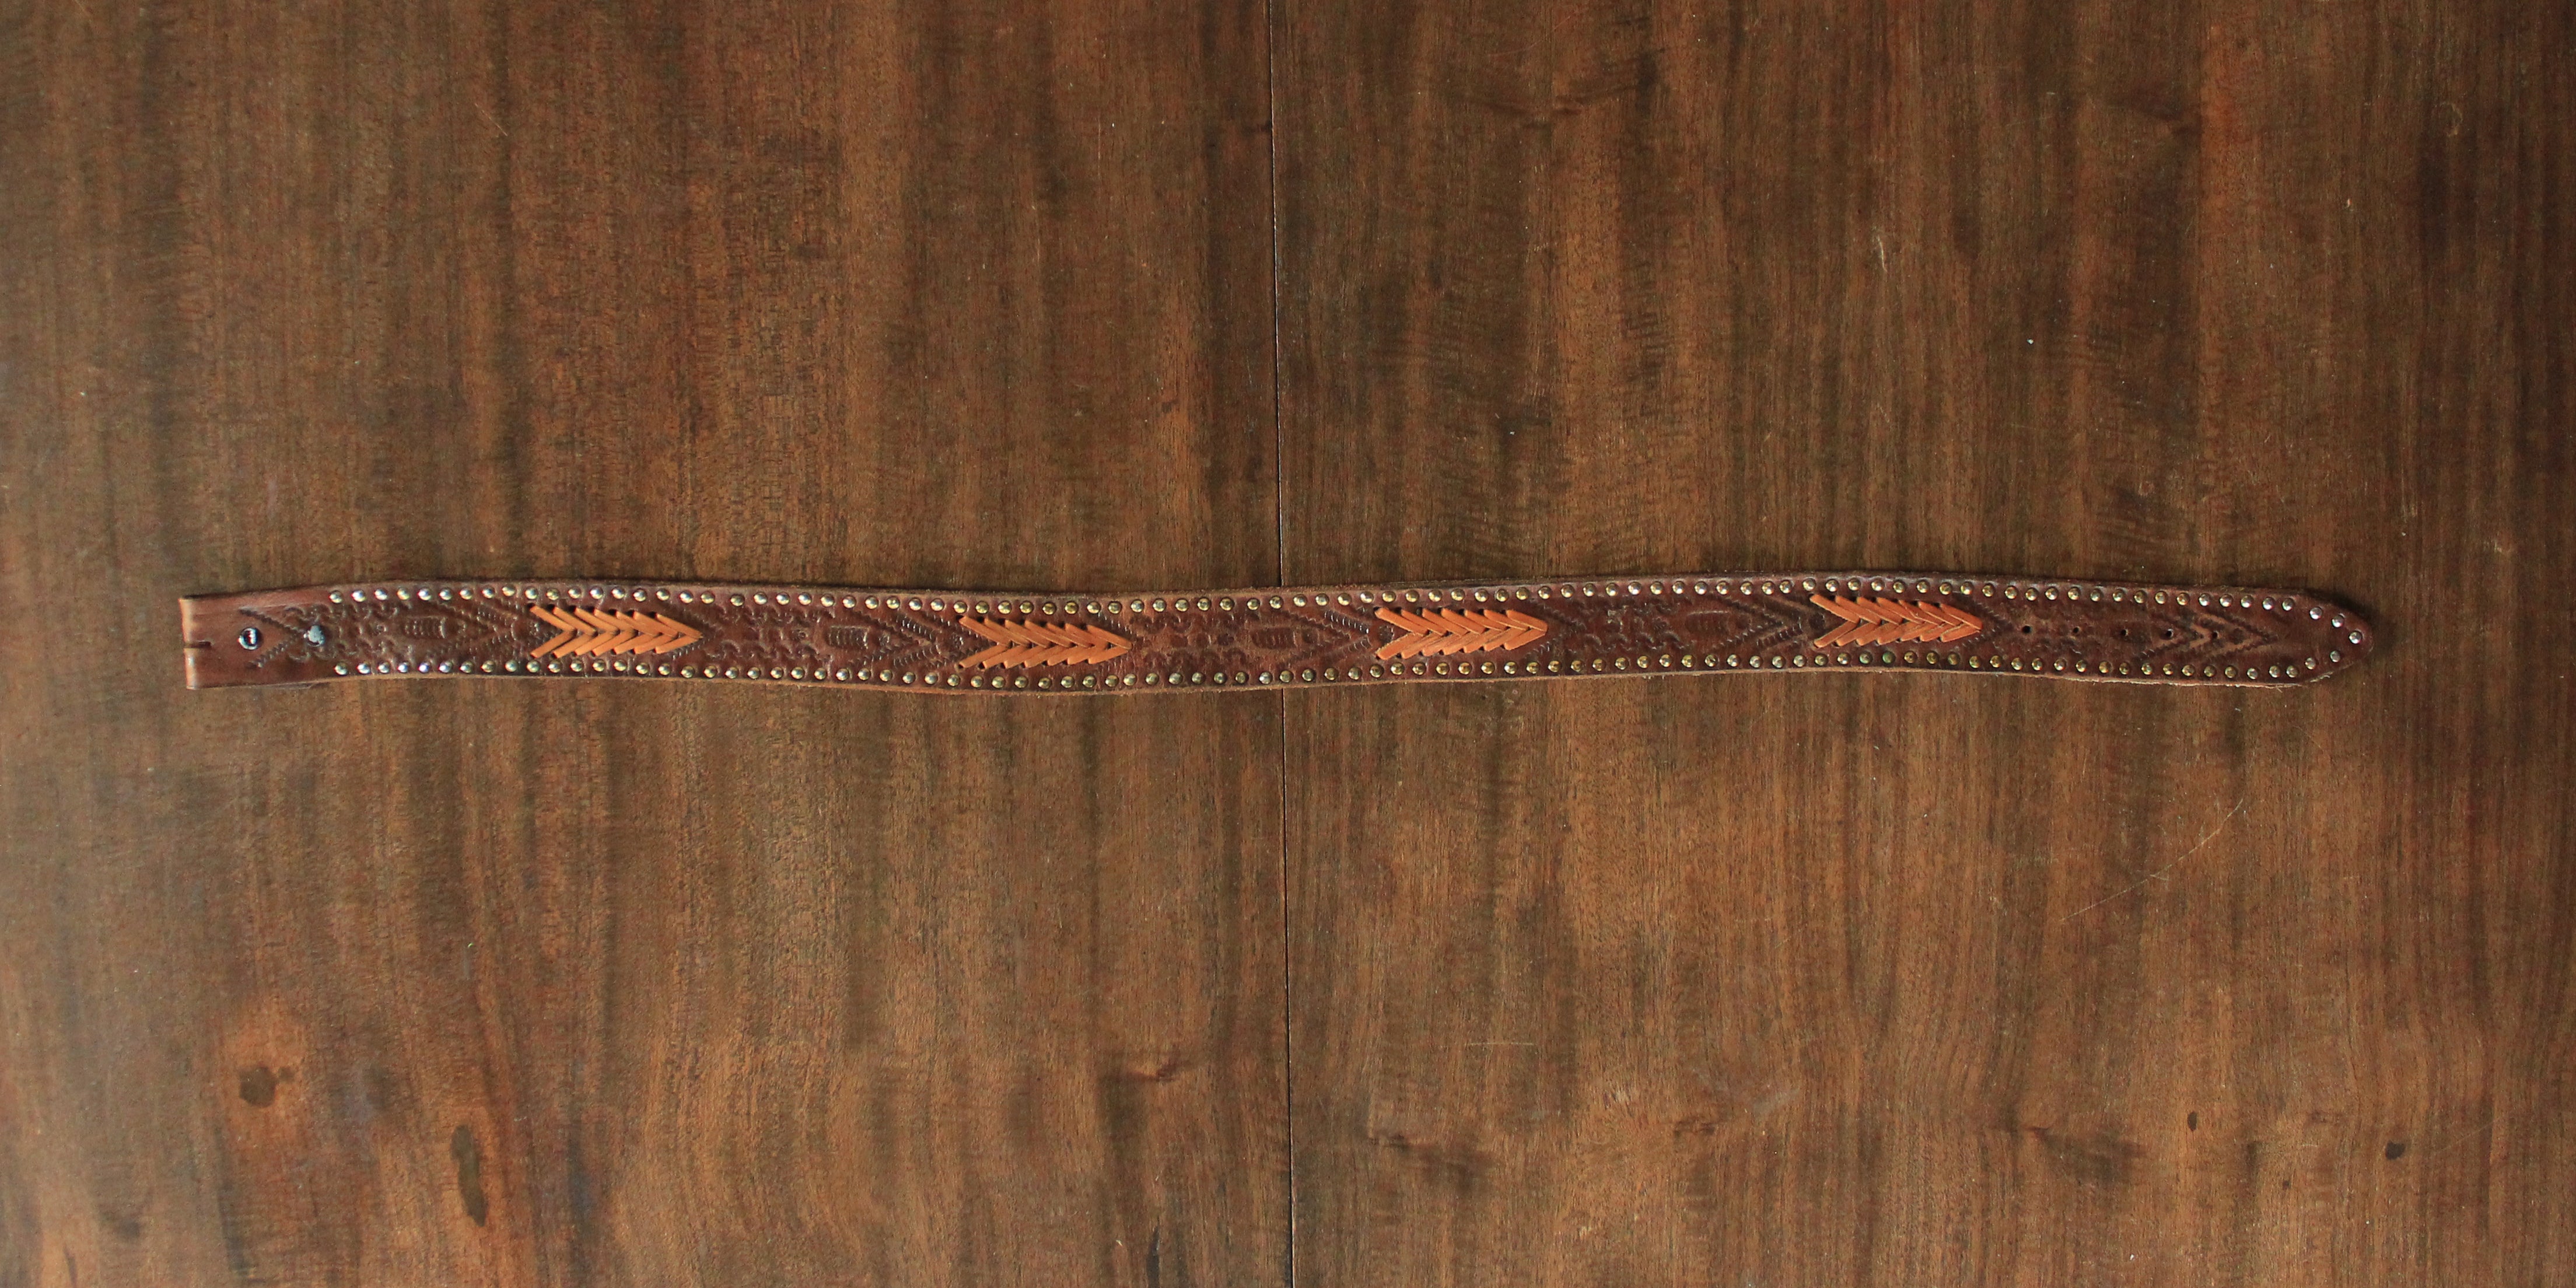 Boho stamped leather belt with rivets size 36 